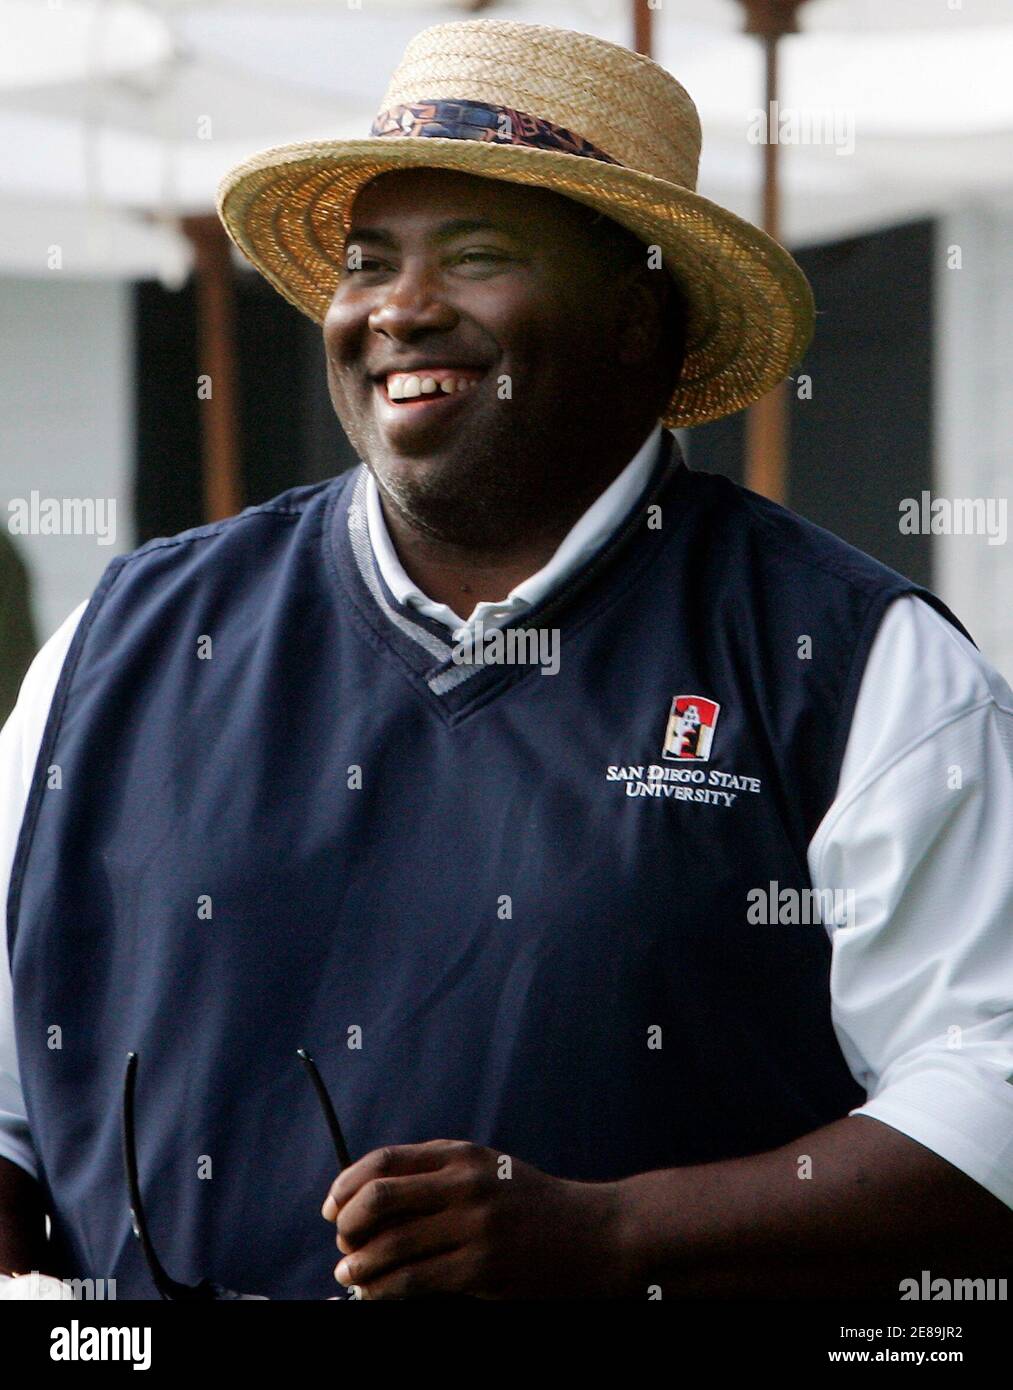 Former San Diego Padre Tony Gwynn smiles as he waits to tee off during the National Baseball Hall of Fame golf tournament at the Leatherstocking golf club in Cooperstown, New York July 28, 2007. Gwynn and former Baltimore Oriole Cal Ripken Jr. will be inducted into the National Baseball Hall of Fame July 29.   REUTERS/Mike Segar (UNITED STATES) Stock Photo